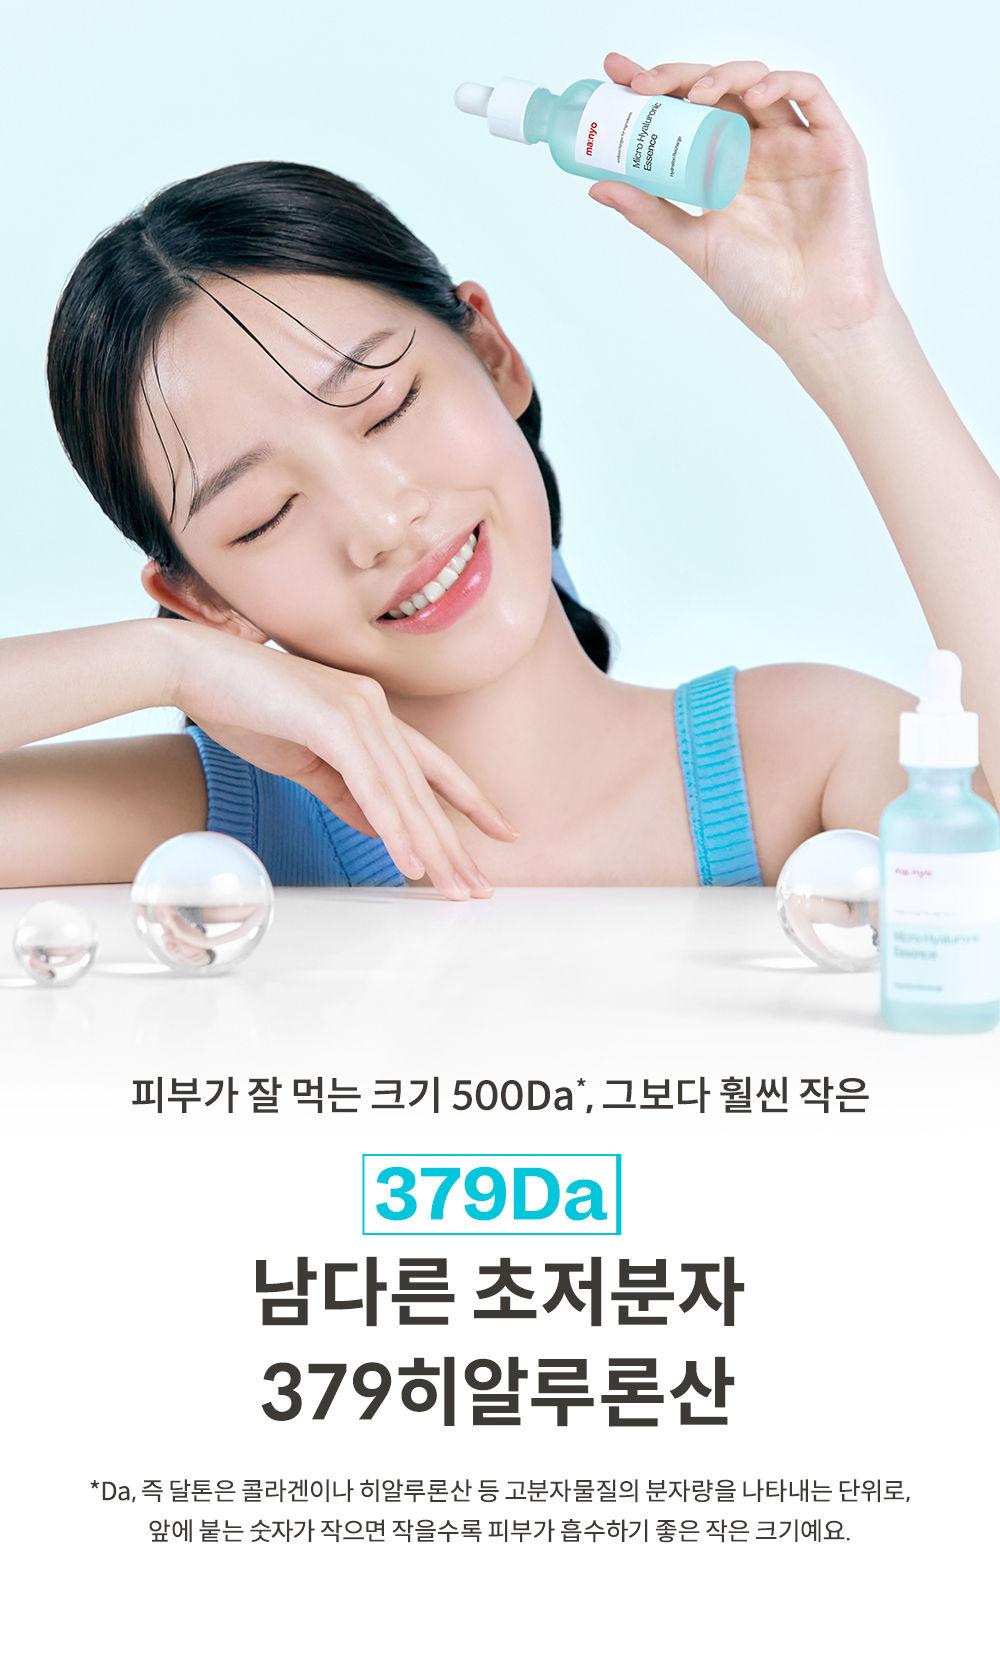 hyaluronic_page_03_141354.jpg